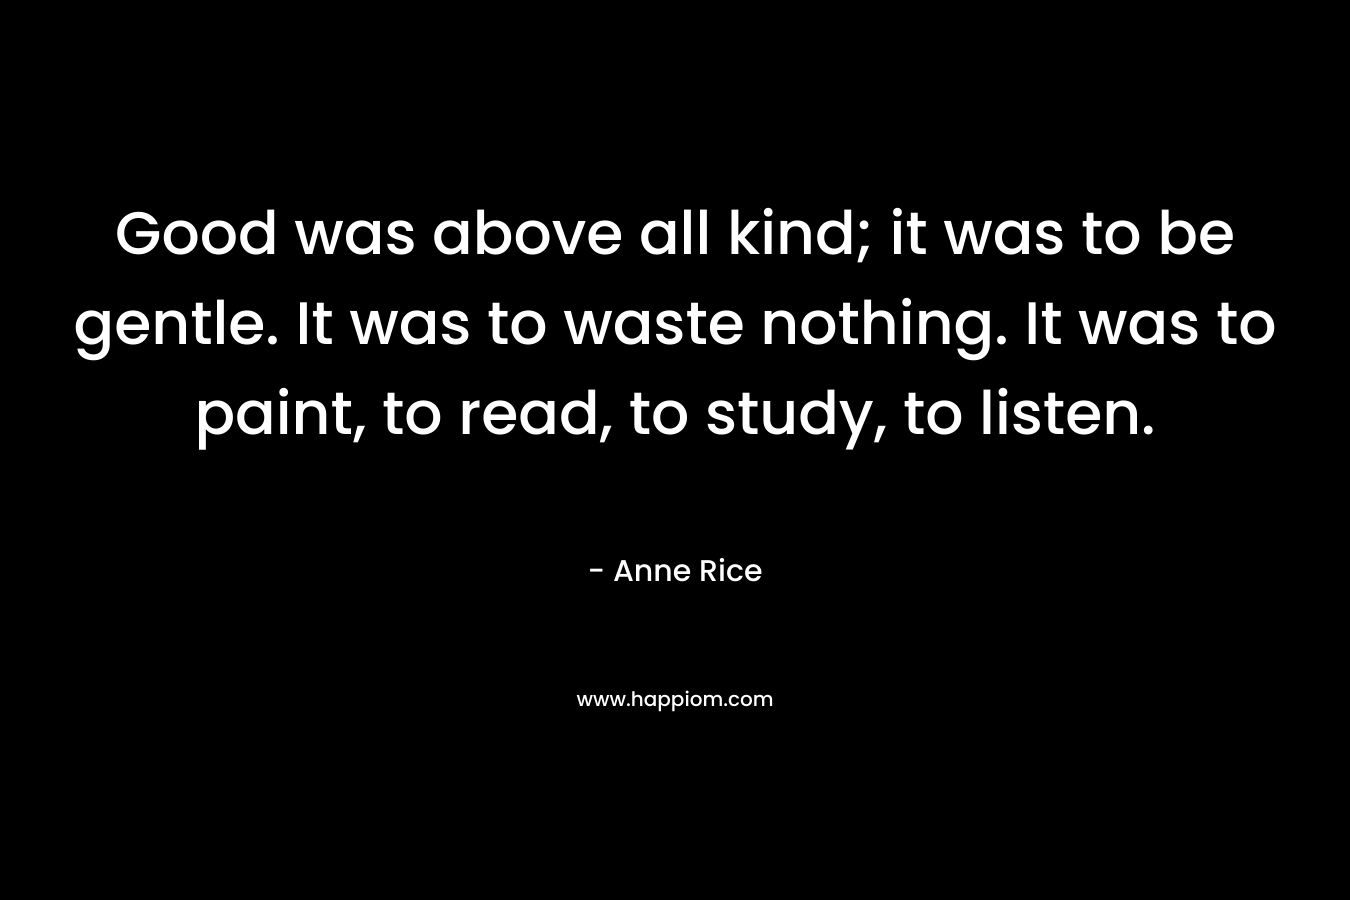 Good was above all kind; it was to be gentle. It was to waste nothing. It was to paint, to read, to study, to listen. – Anne Rice